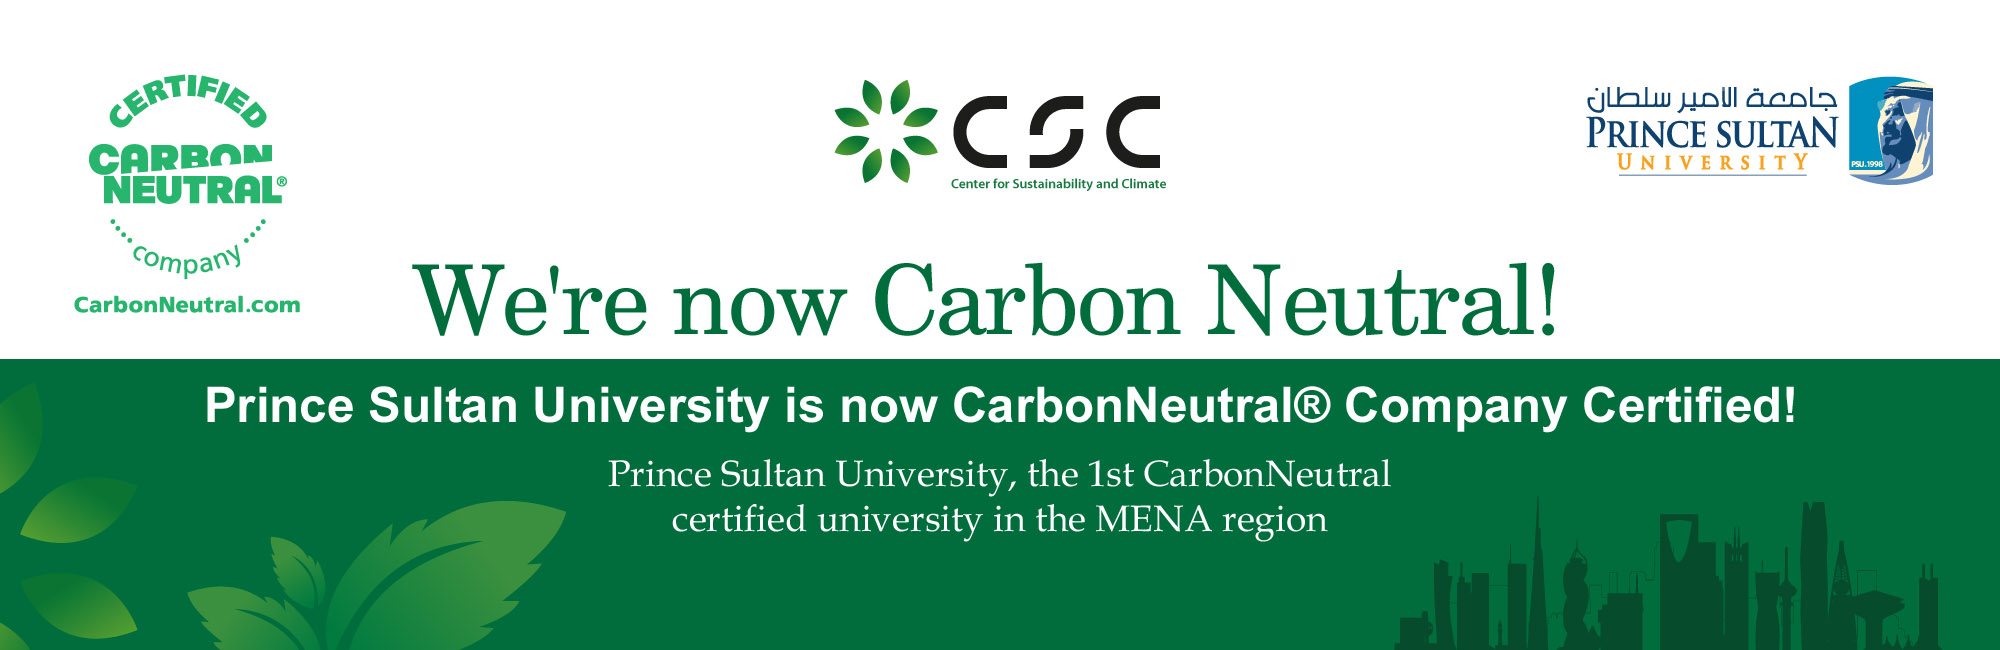 Prince Sultan University is Carbon Neutral Certified